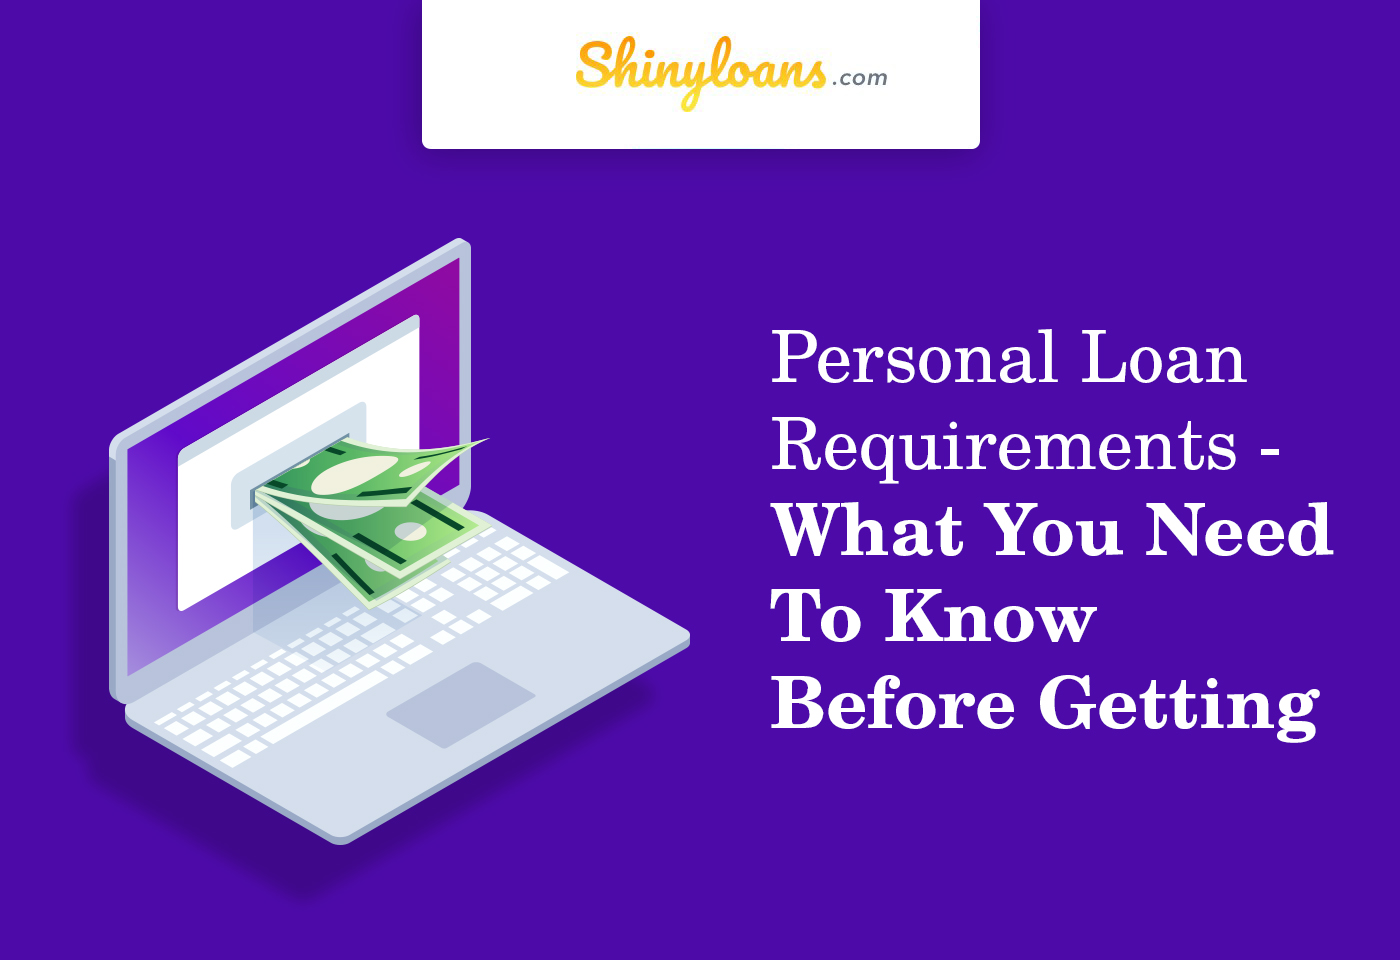 Personal Loan Requirements - What You Need To Know Before Getting